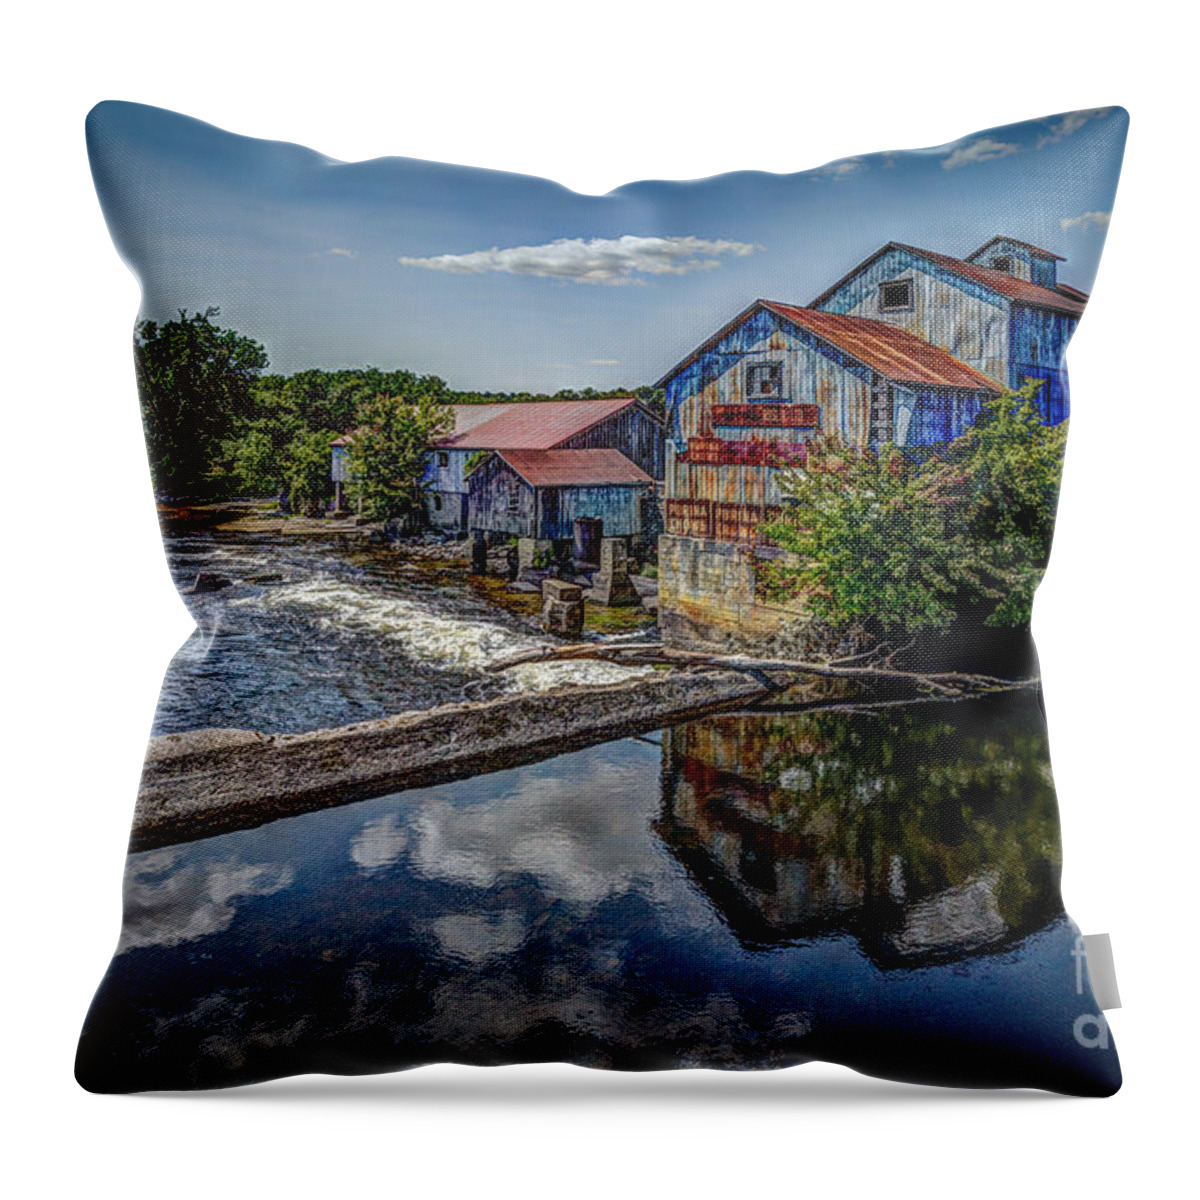 Abandoned Throw Pillow featuring the photograph Chisolm's Mills by Roger Monahan